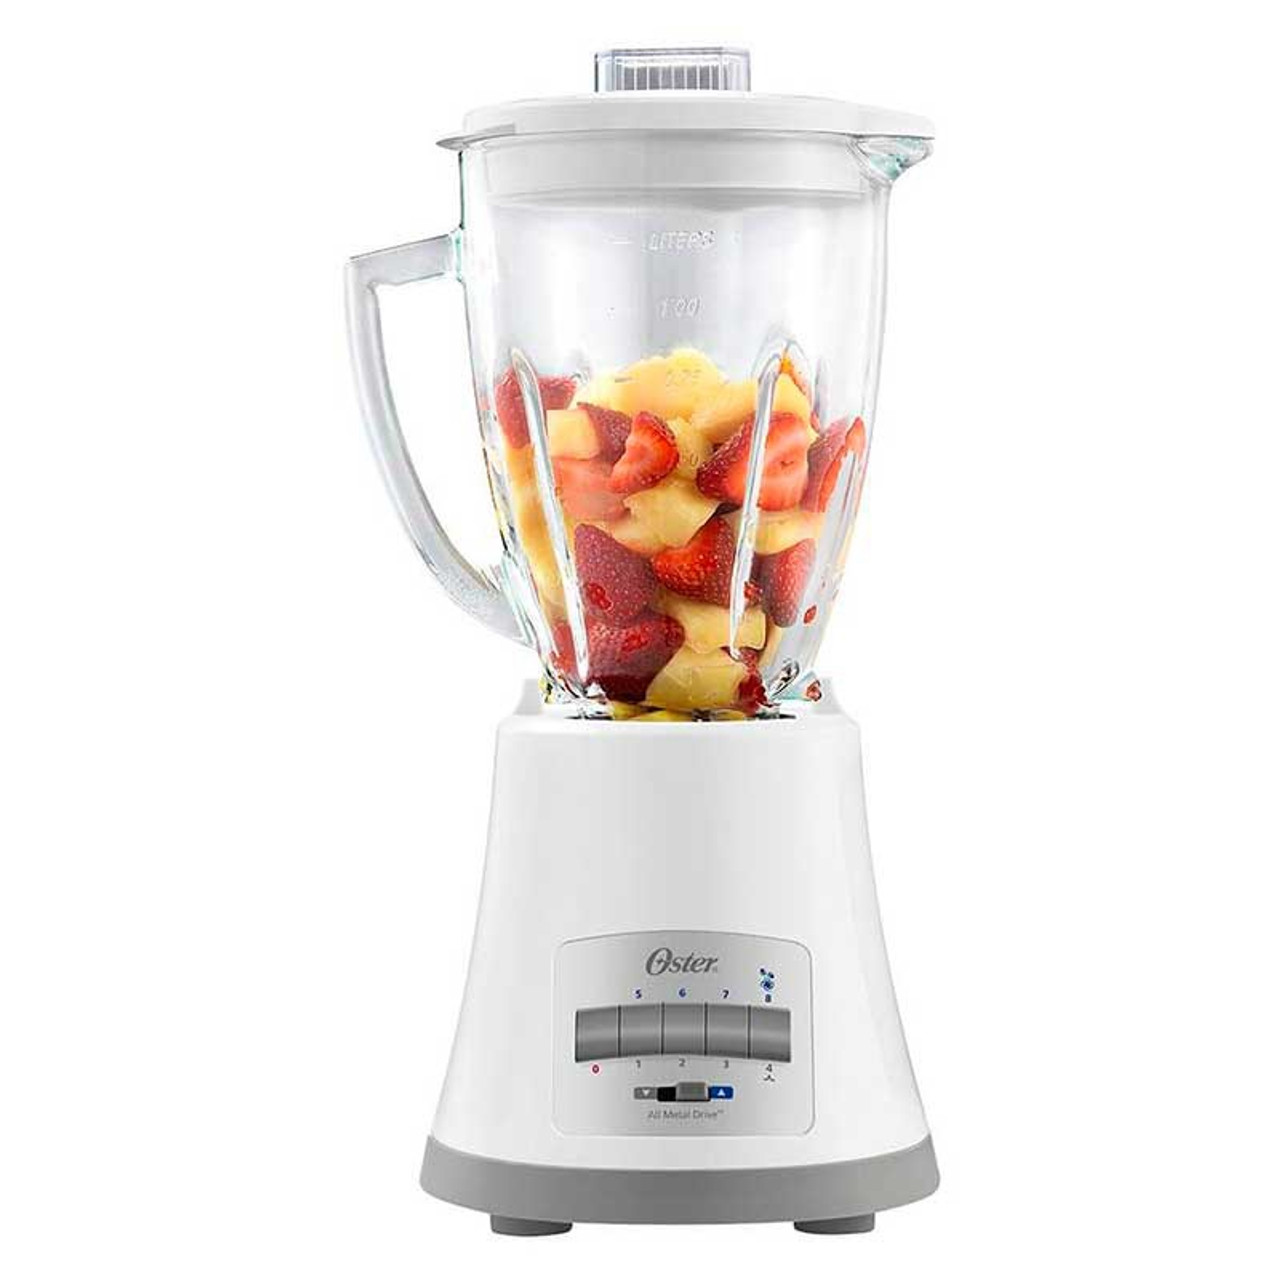 Oster BLSTKAG-WRD-053 White Blender WITH GLASS JAR 550W